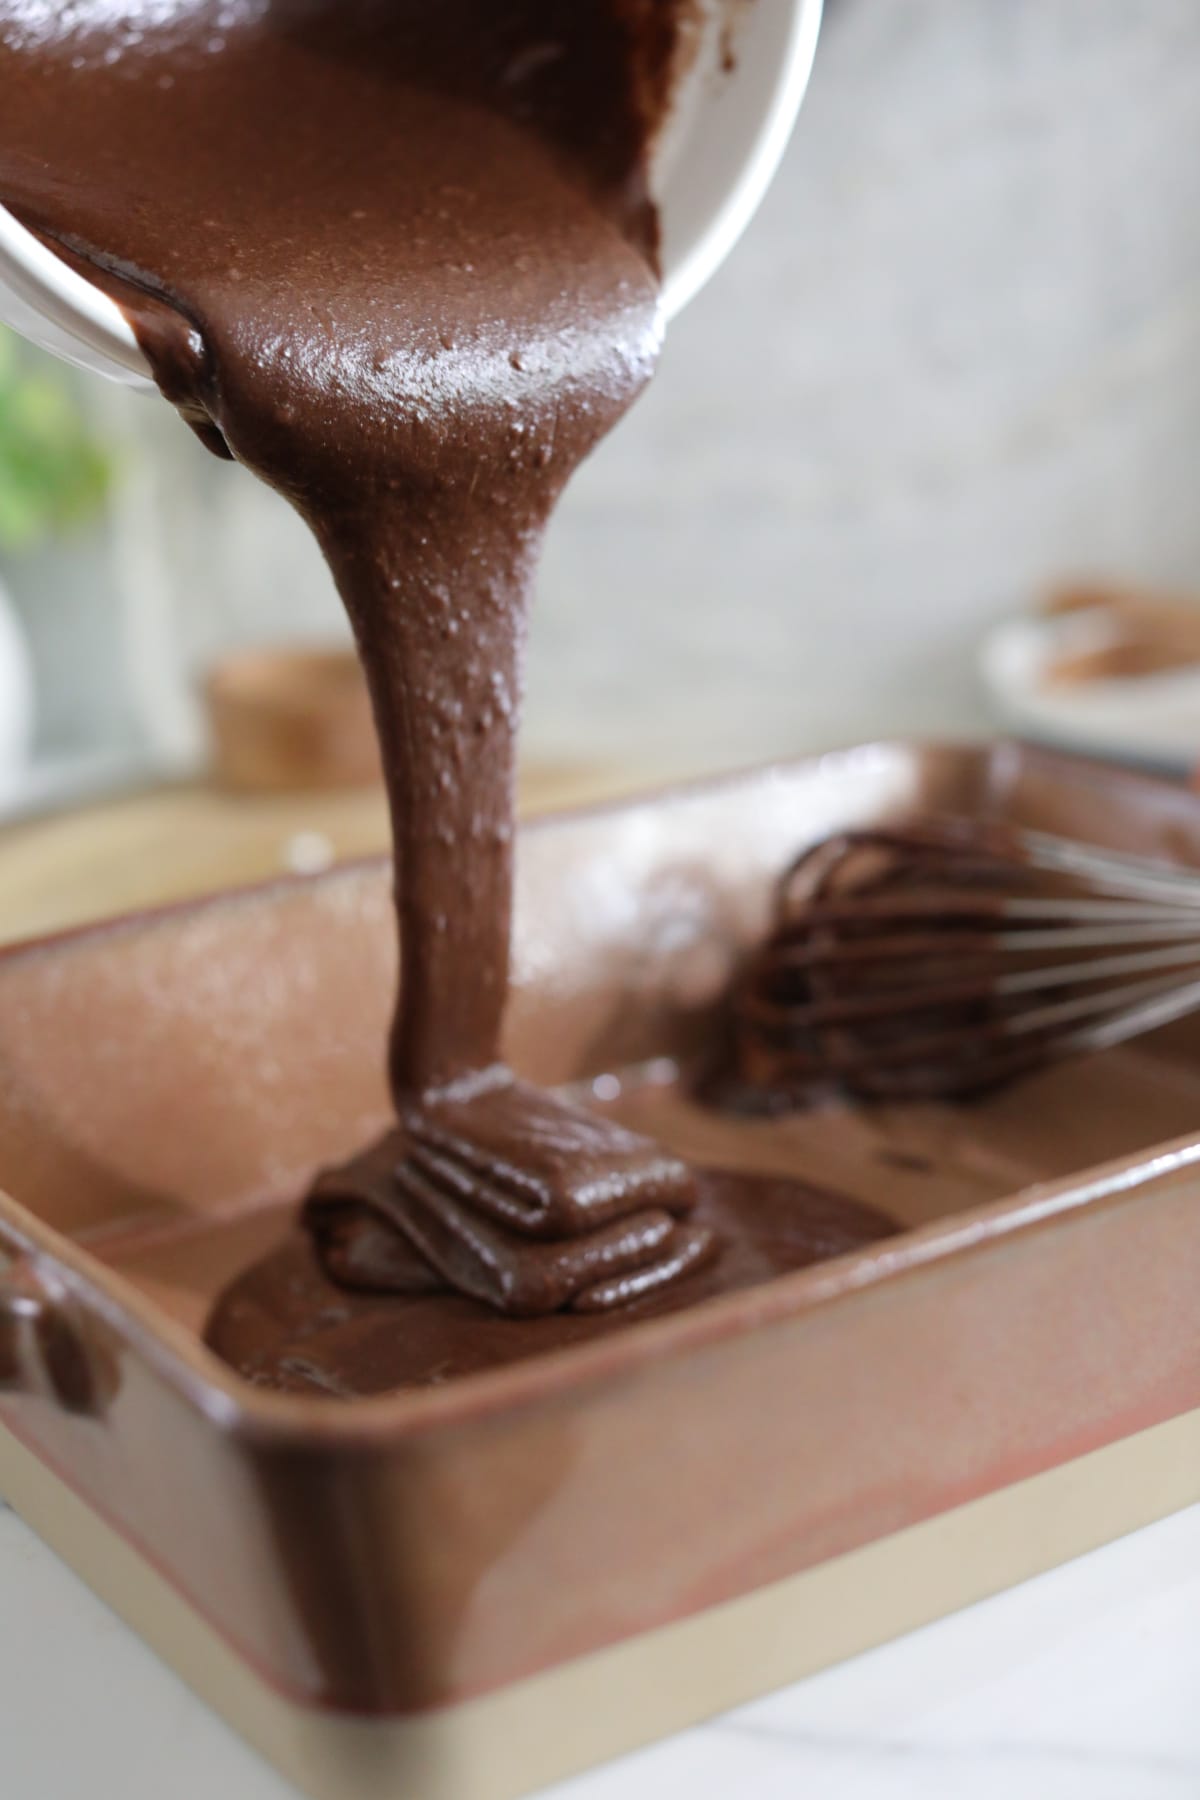 Pouring brownie batter into baking pan